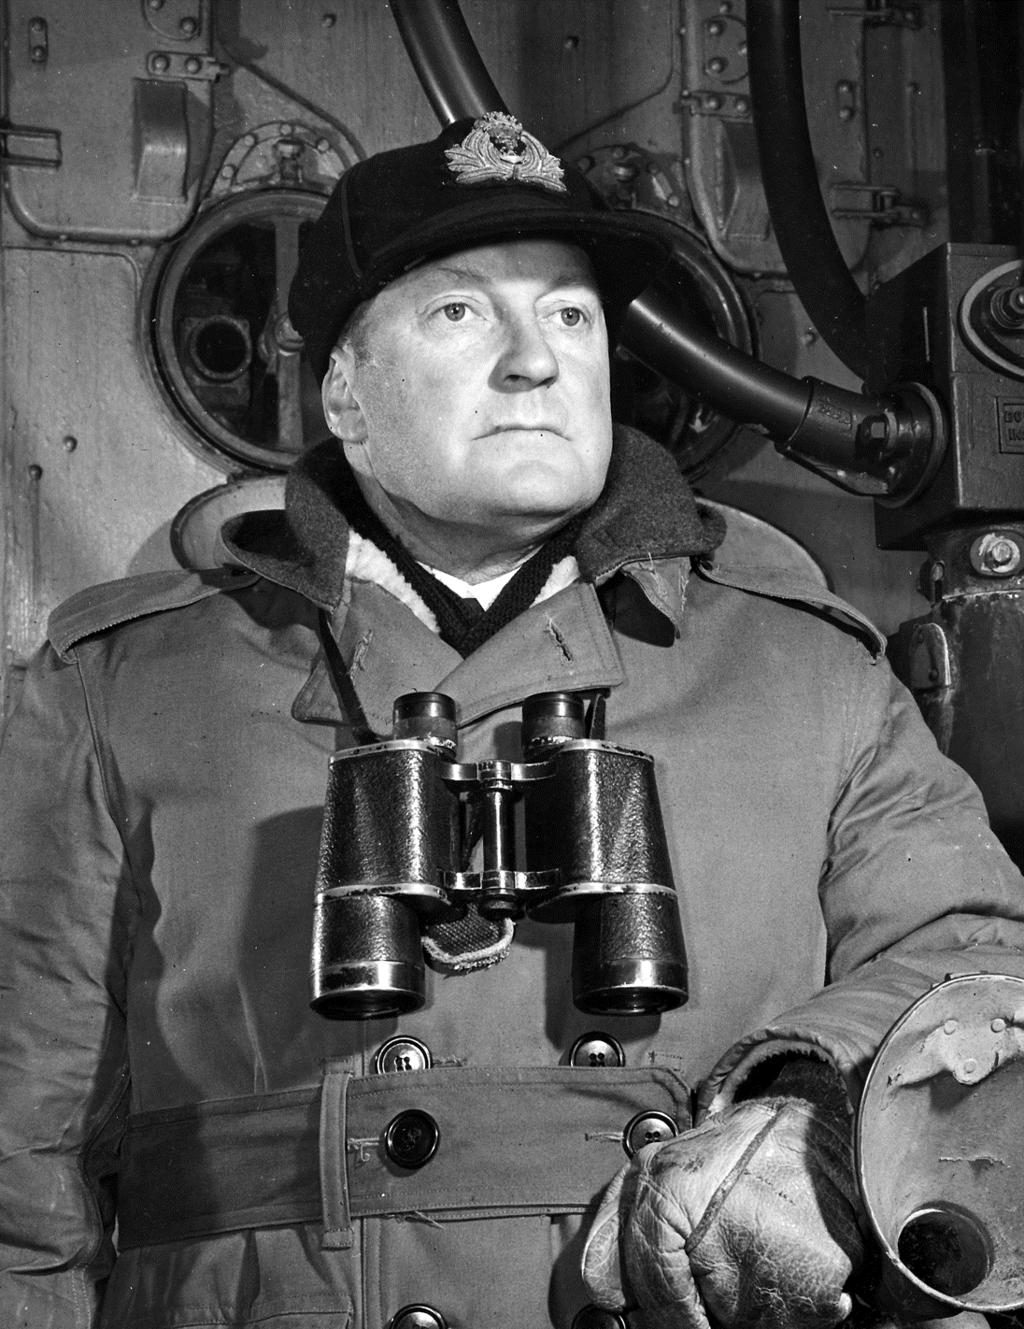 Commander Leonard W. Murray, 1940 A graduate of the Royal Naval College of Canada, Murray was a prewar regular officer who took over command of the Newfoundland Escort Force in May 1941.